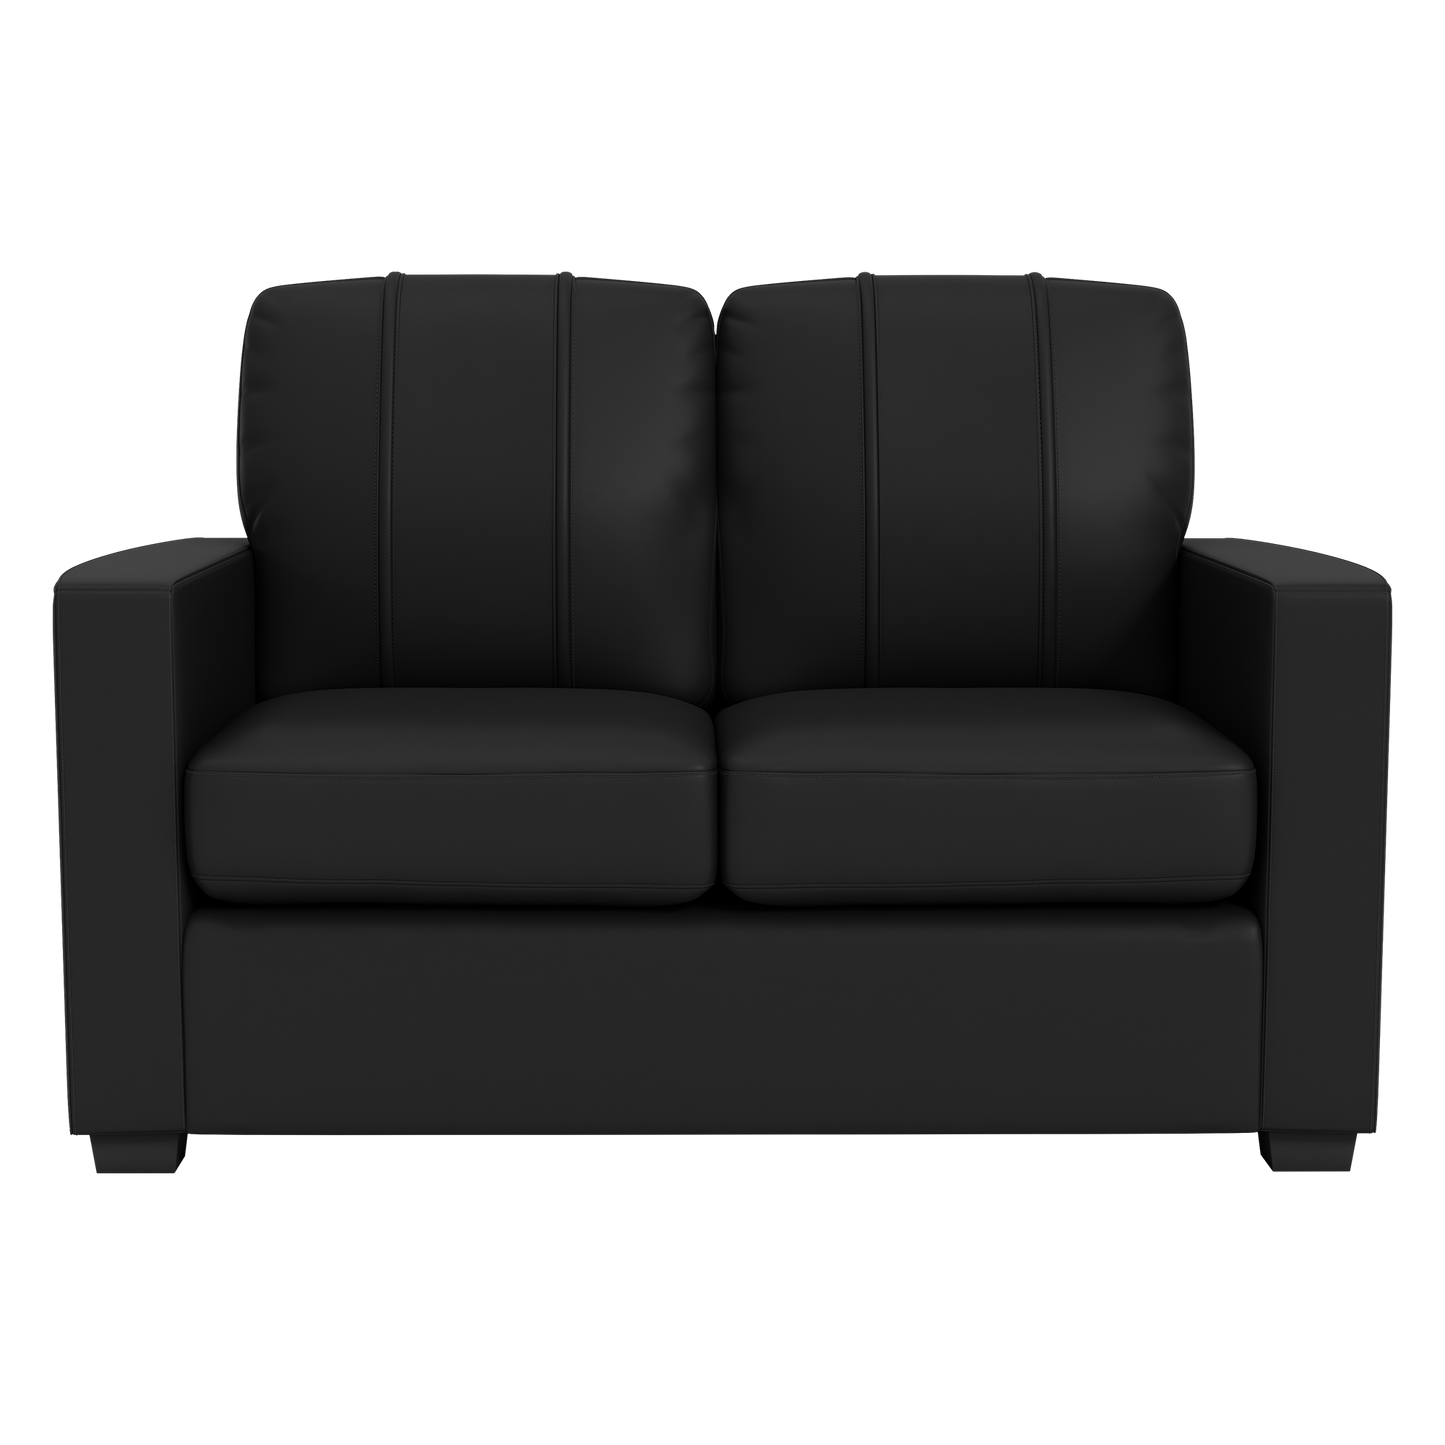 Silver Loveseat with  Los Angeles Rams Secondary Logo